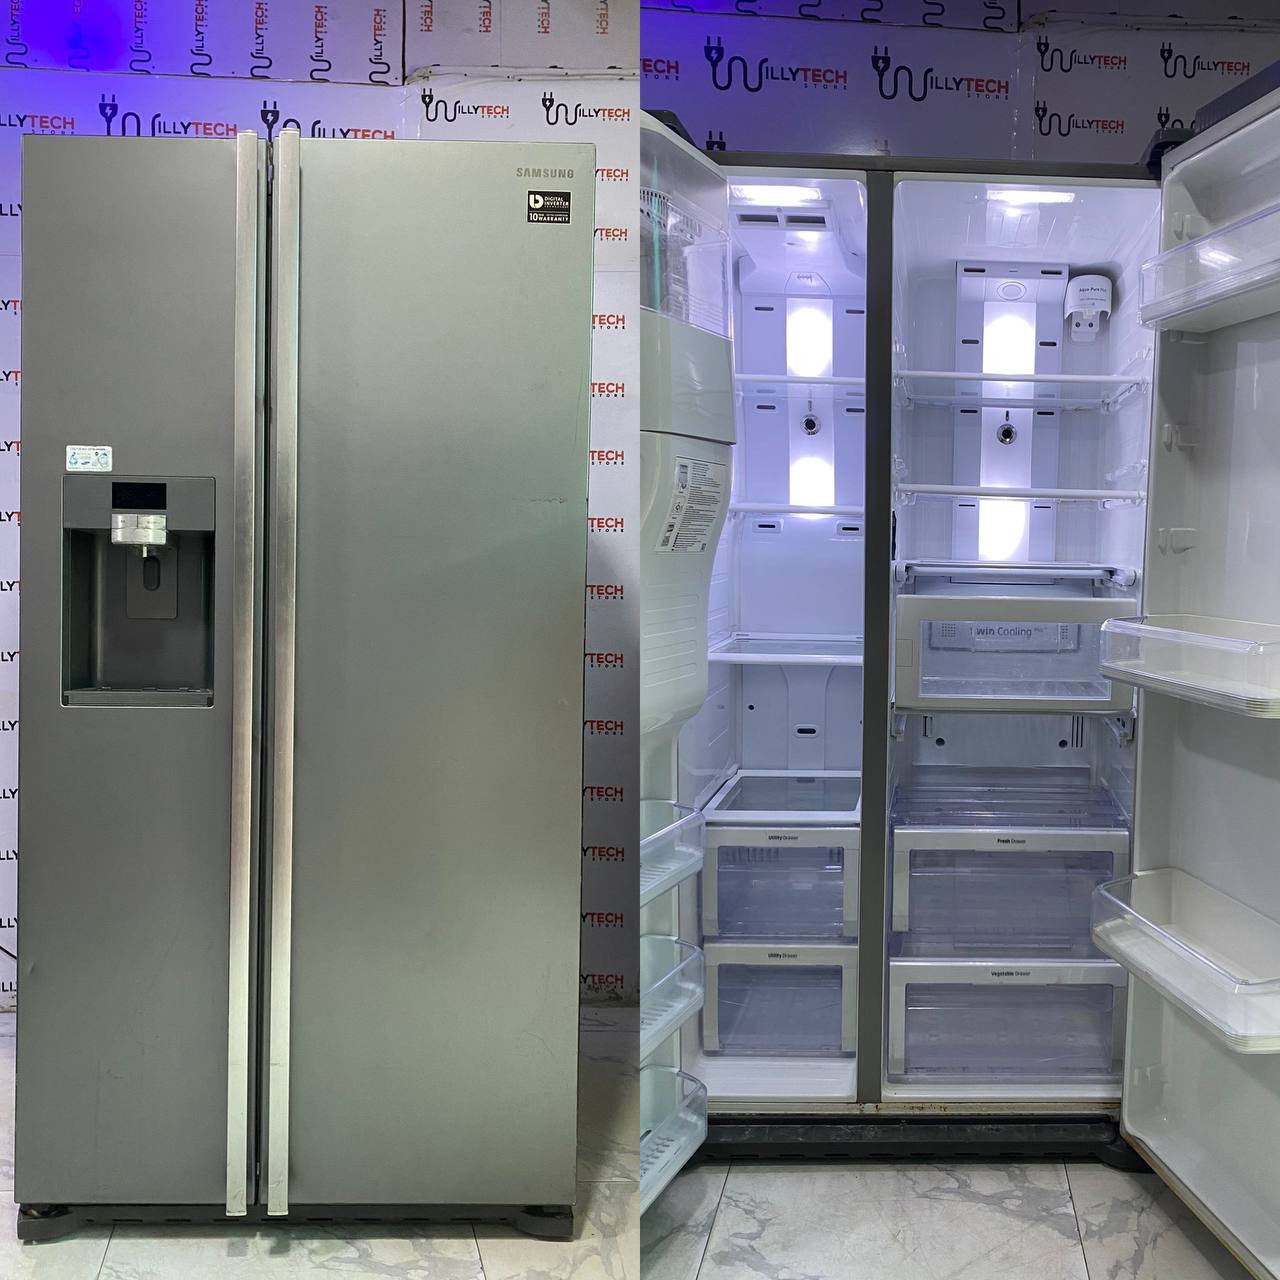 Samsung Inverter 600L Side By Side Double Door Refrigerator With Ice Maker & Cold Water Dispenser